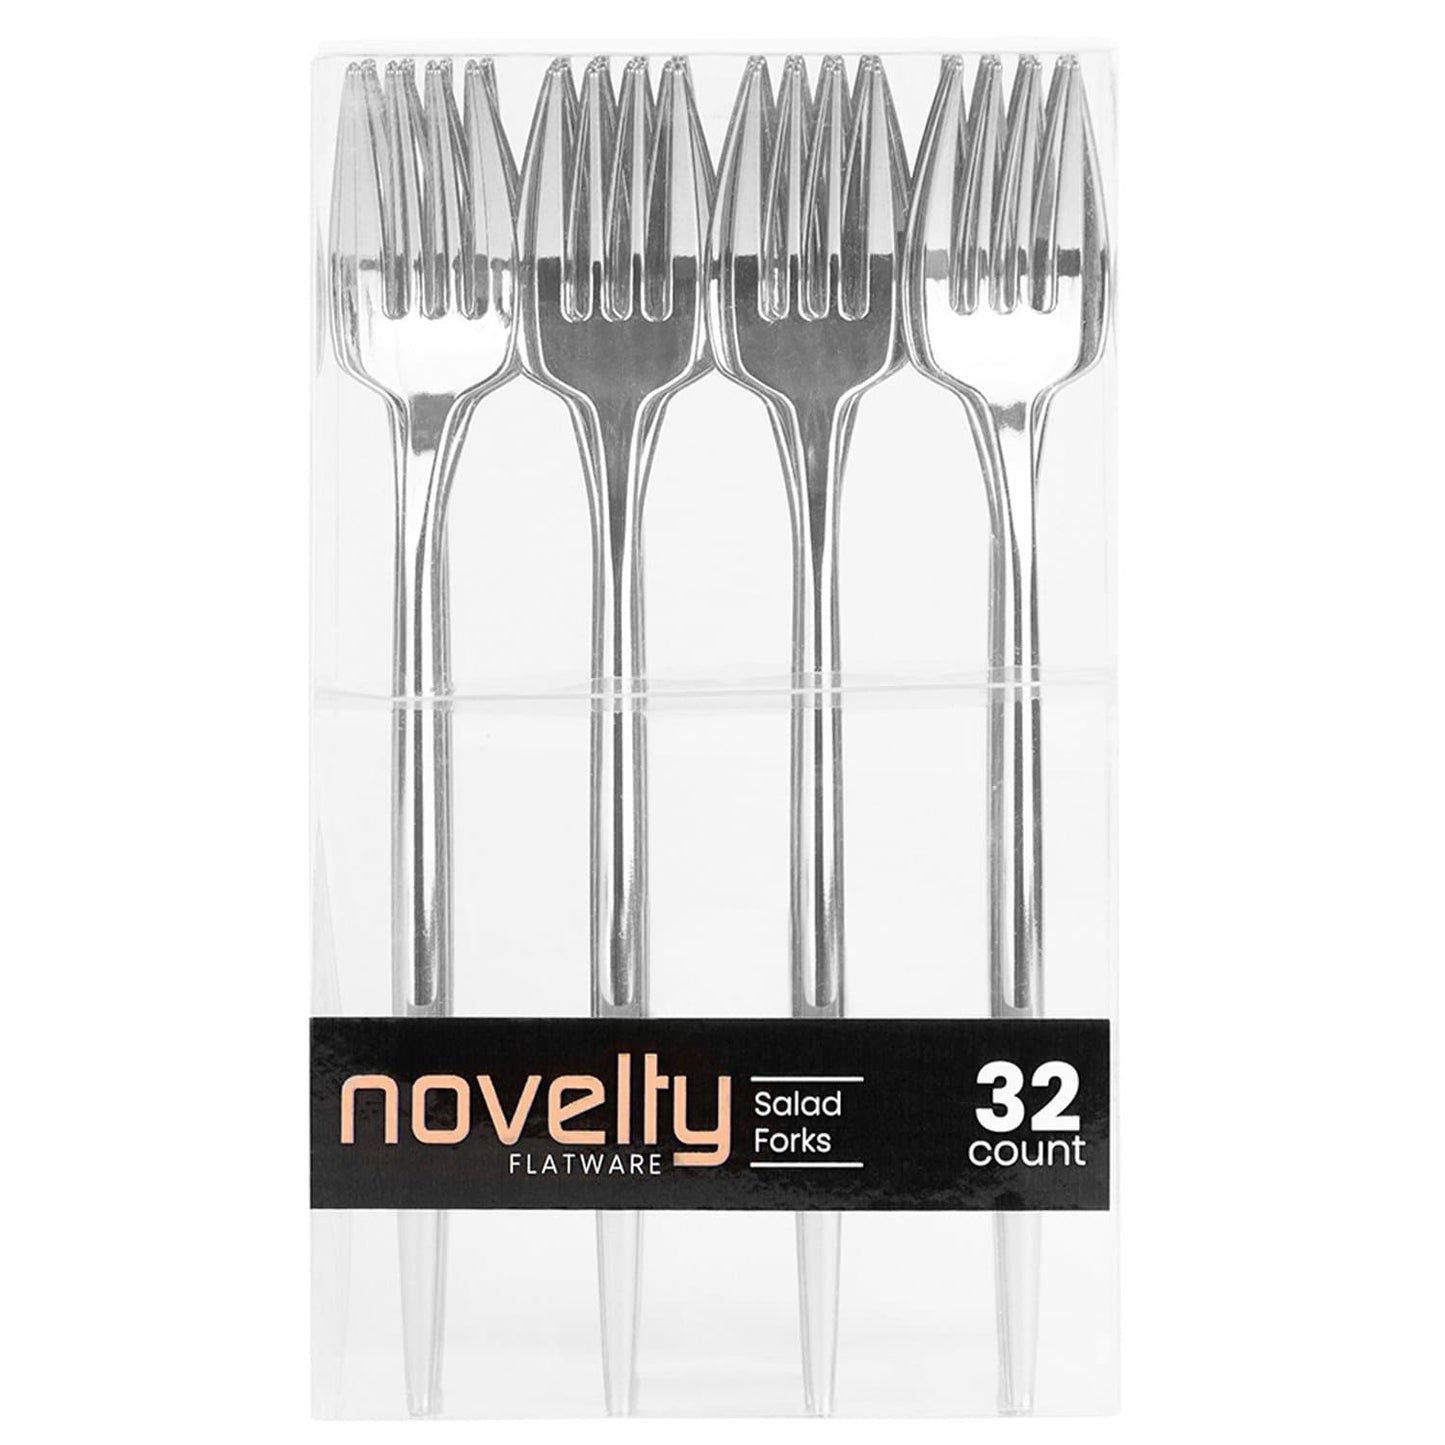 NOVELTY FLATWARE DINNER SALAD FORKS SILVER Tablesettings Blue Sky 32 Pieces  